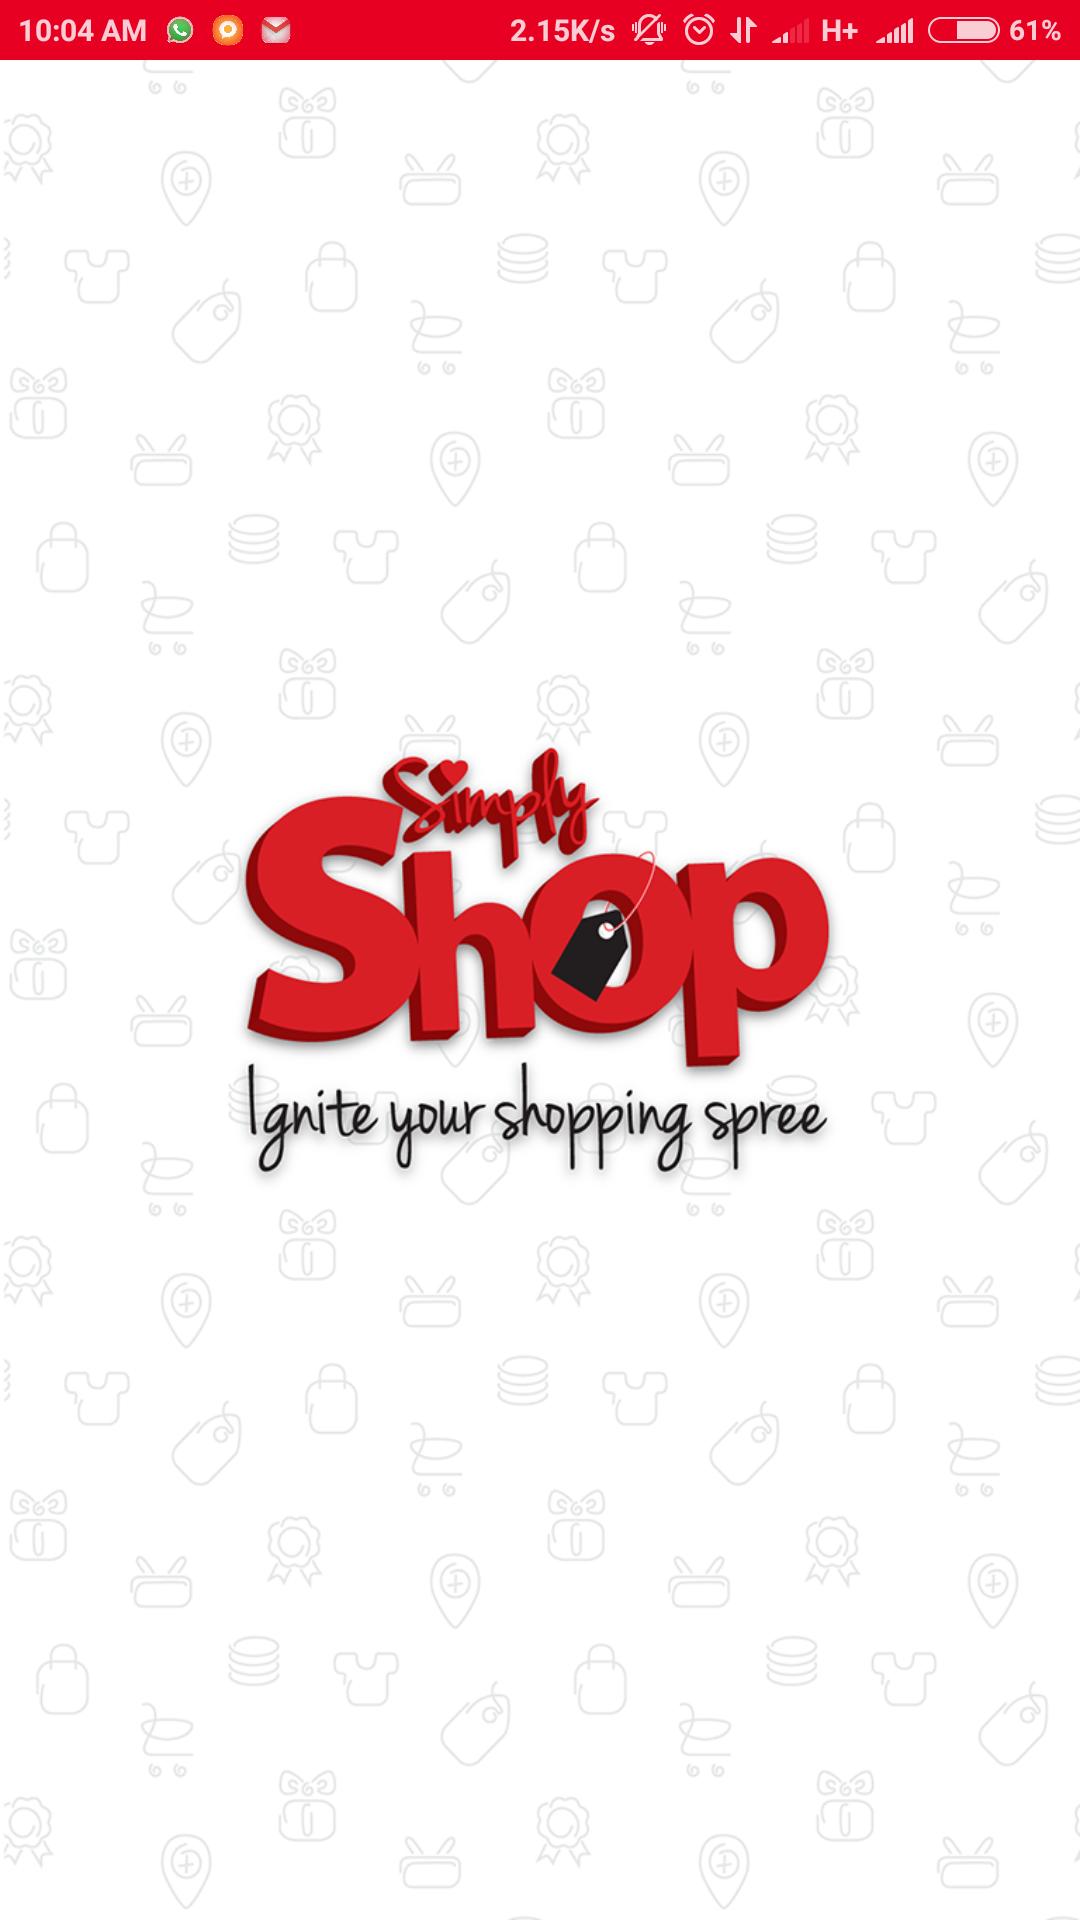 Simply Shop for Android - APK Download